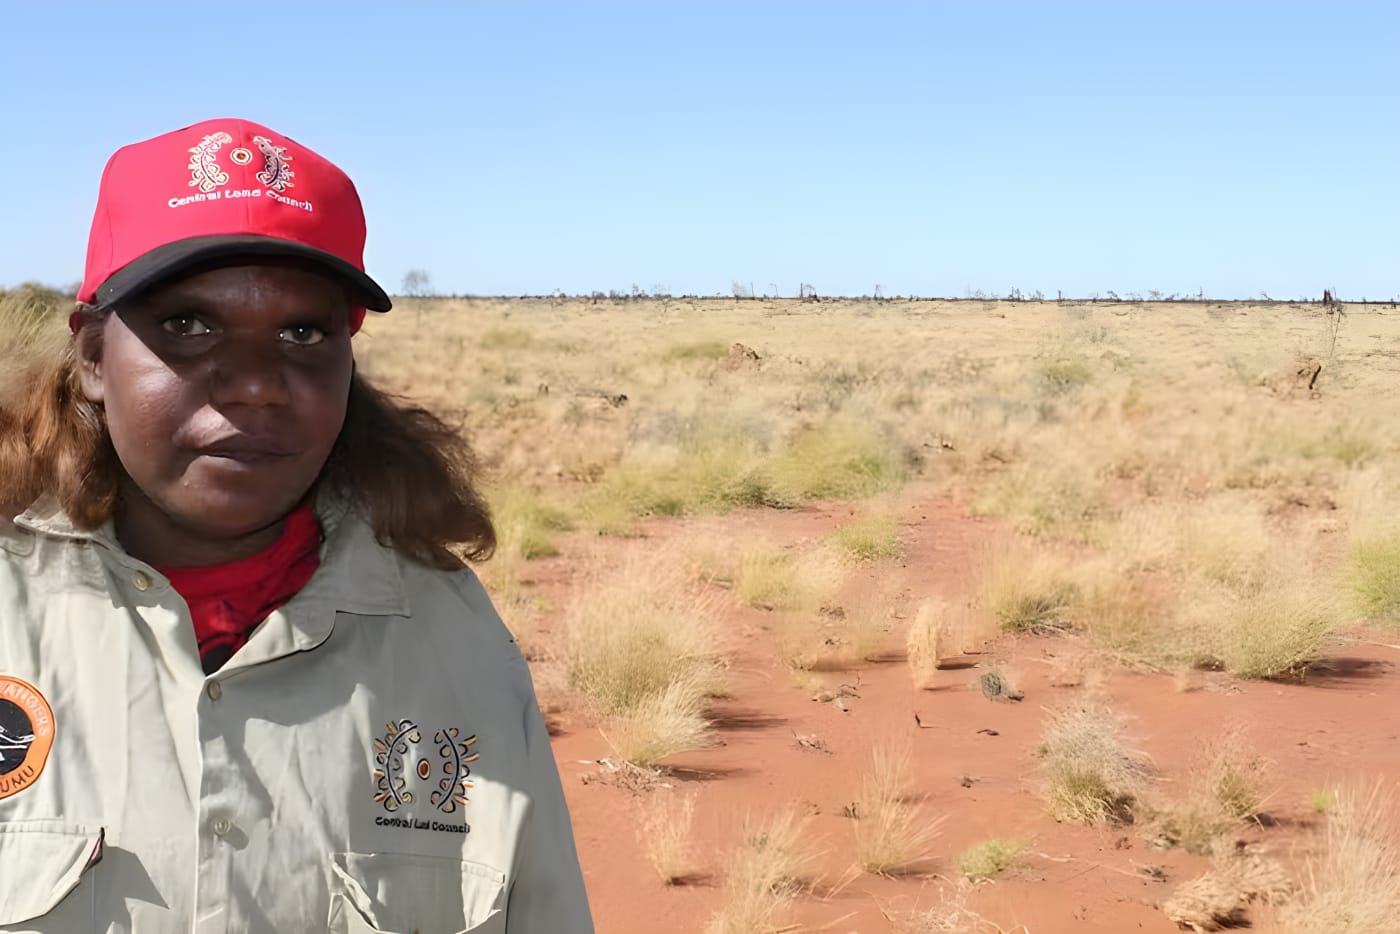 Pictured: Warlpiri woman Christine Michaels, an Indigenous ranger working in the Southern Tanami Indigenous Protected Area in Central Australia.